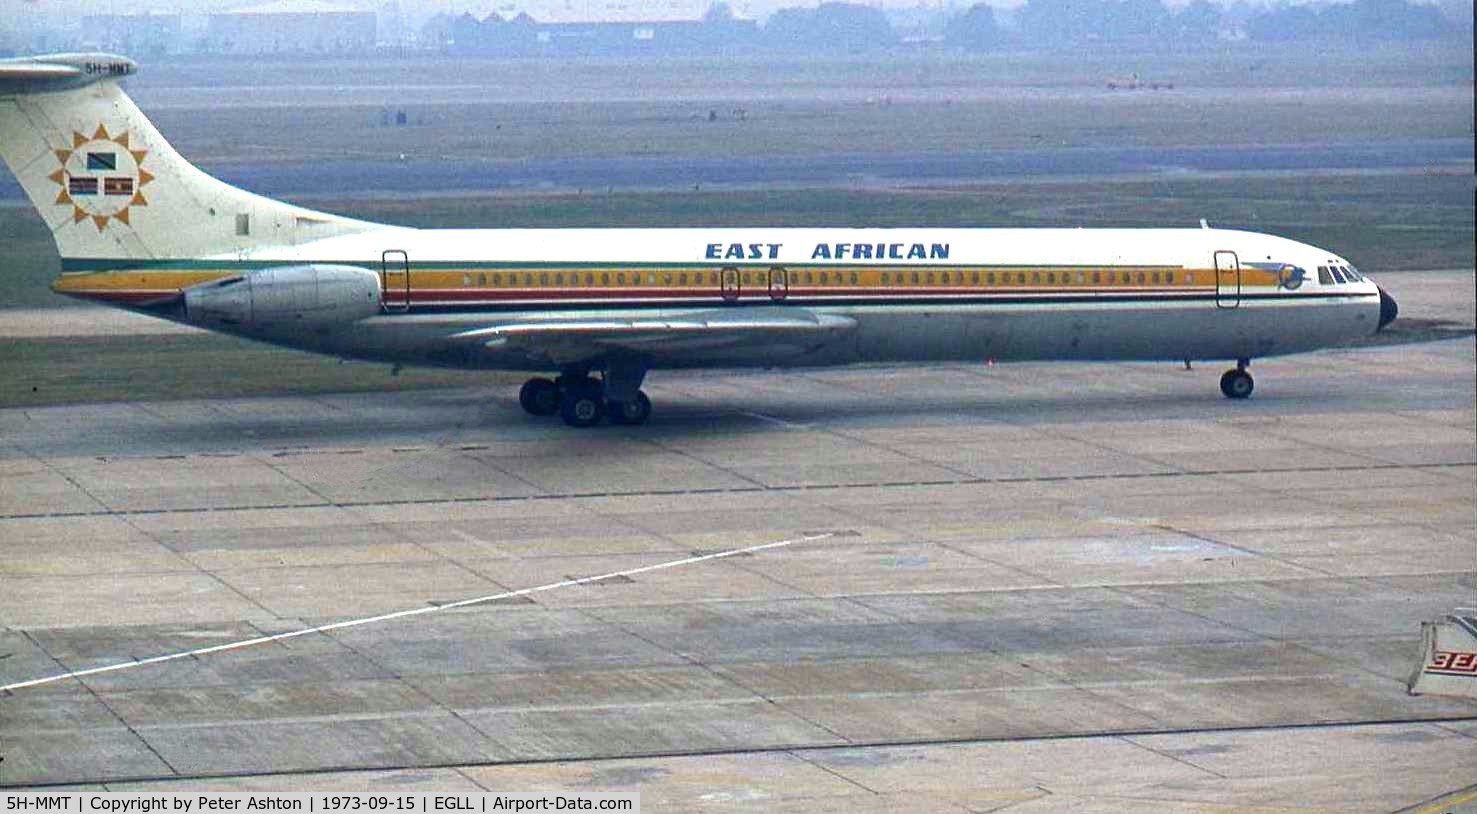 5H-MMT, 1966 Vickers Super VC10 Srs 1154 C/N 882, East African Vickers VC10 1153